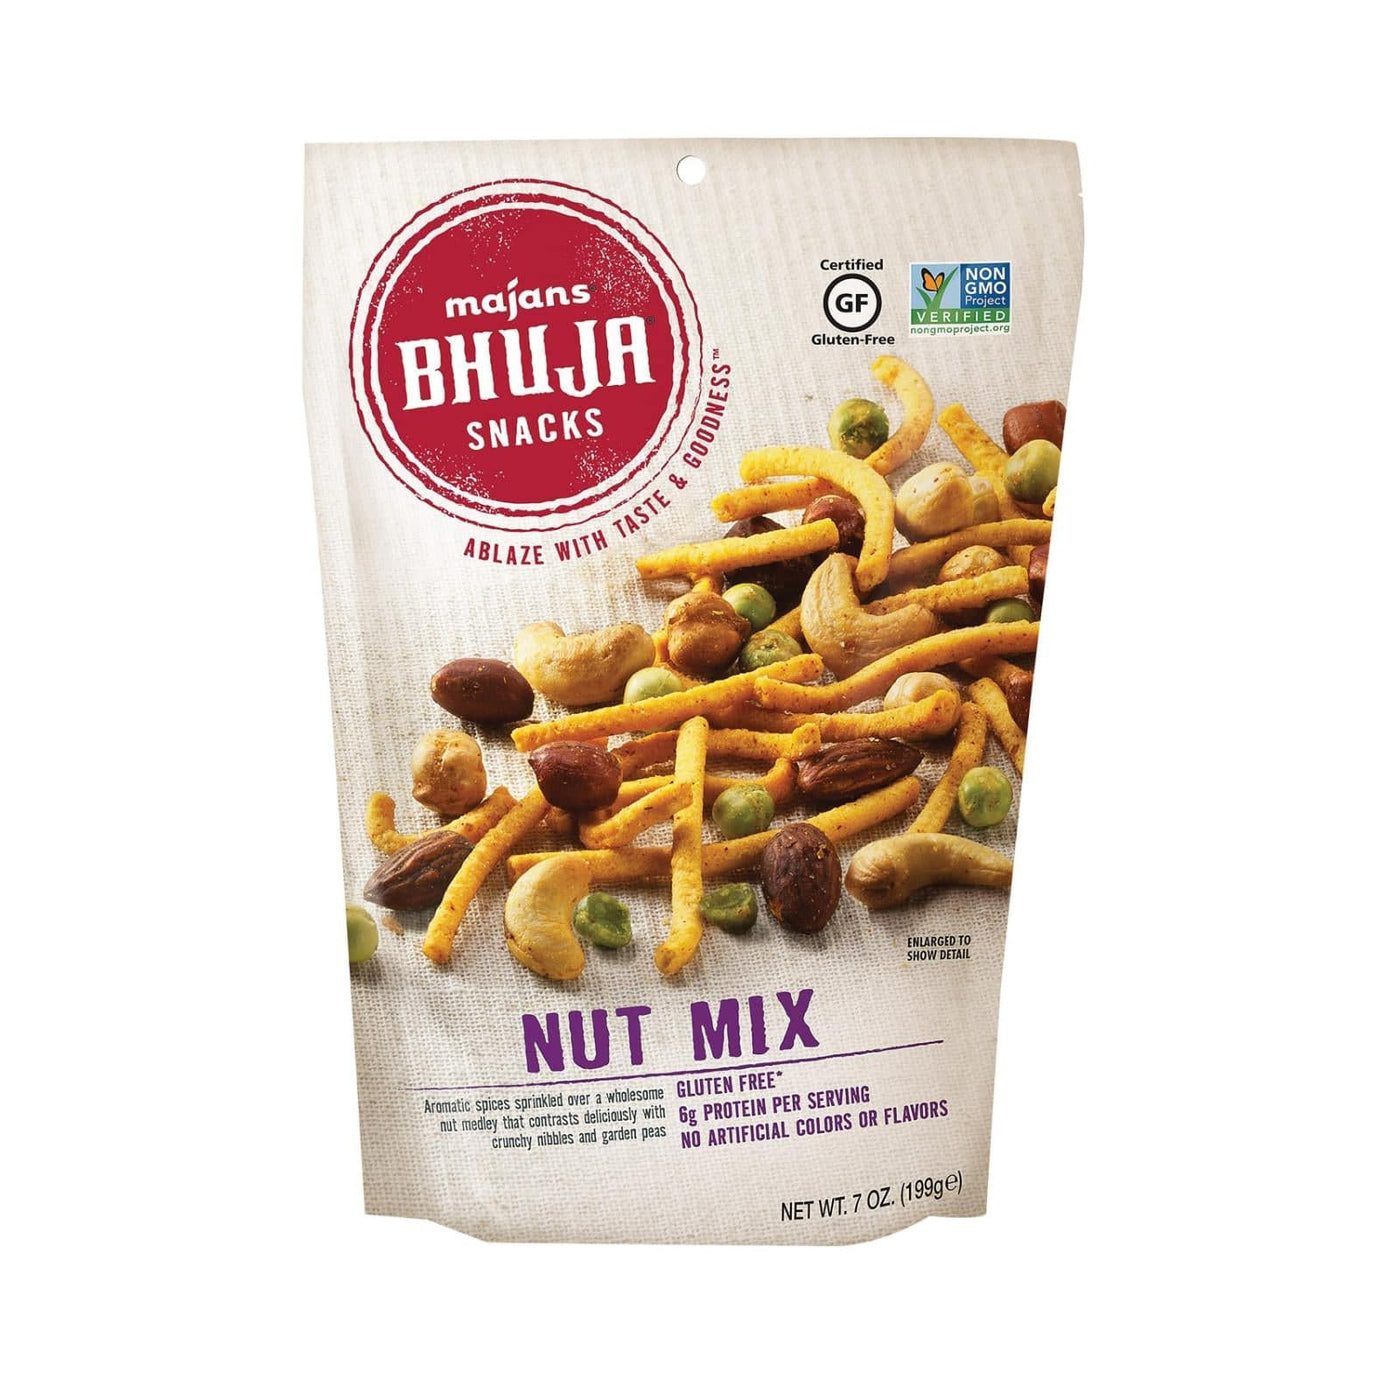 Buy Bhuja Snacks - Nut Mix - Case Of 6 - 7 Oz.  at OnlyNaturals.us